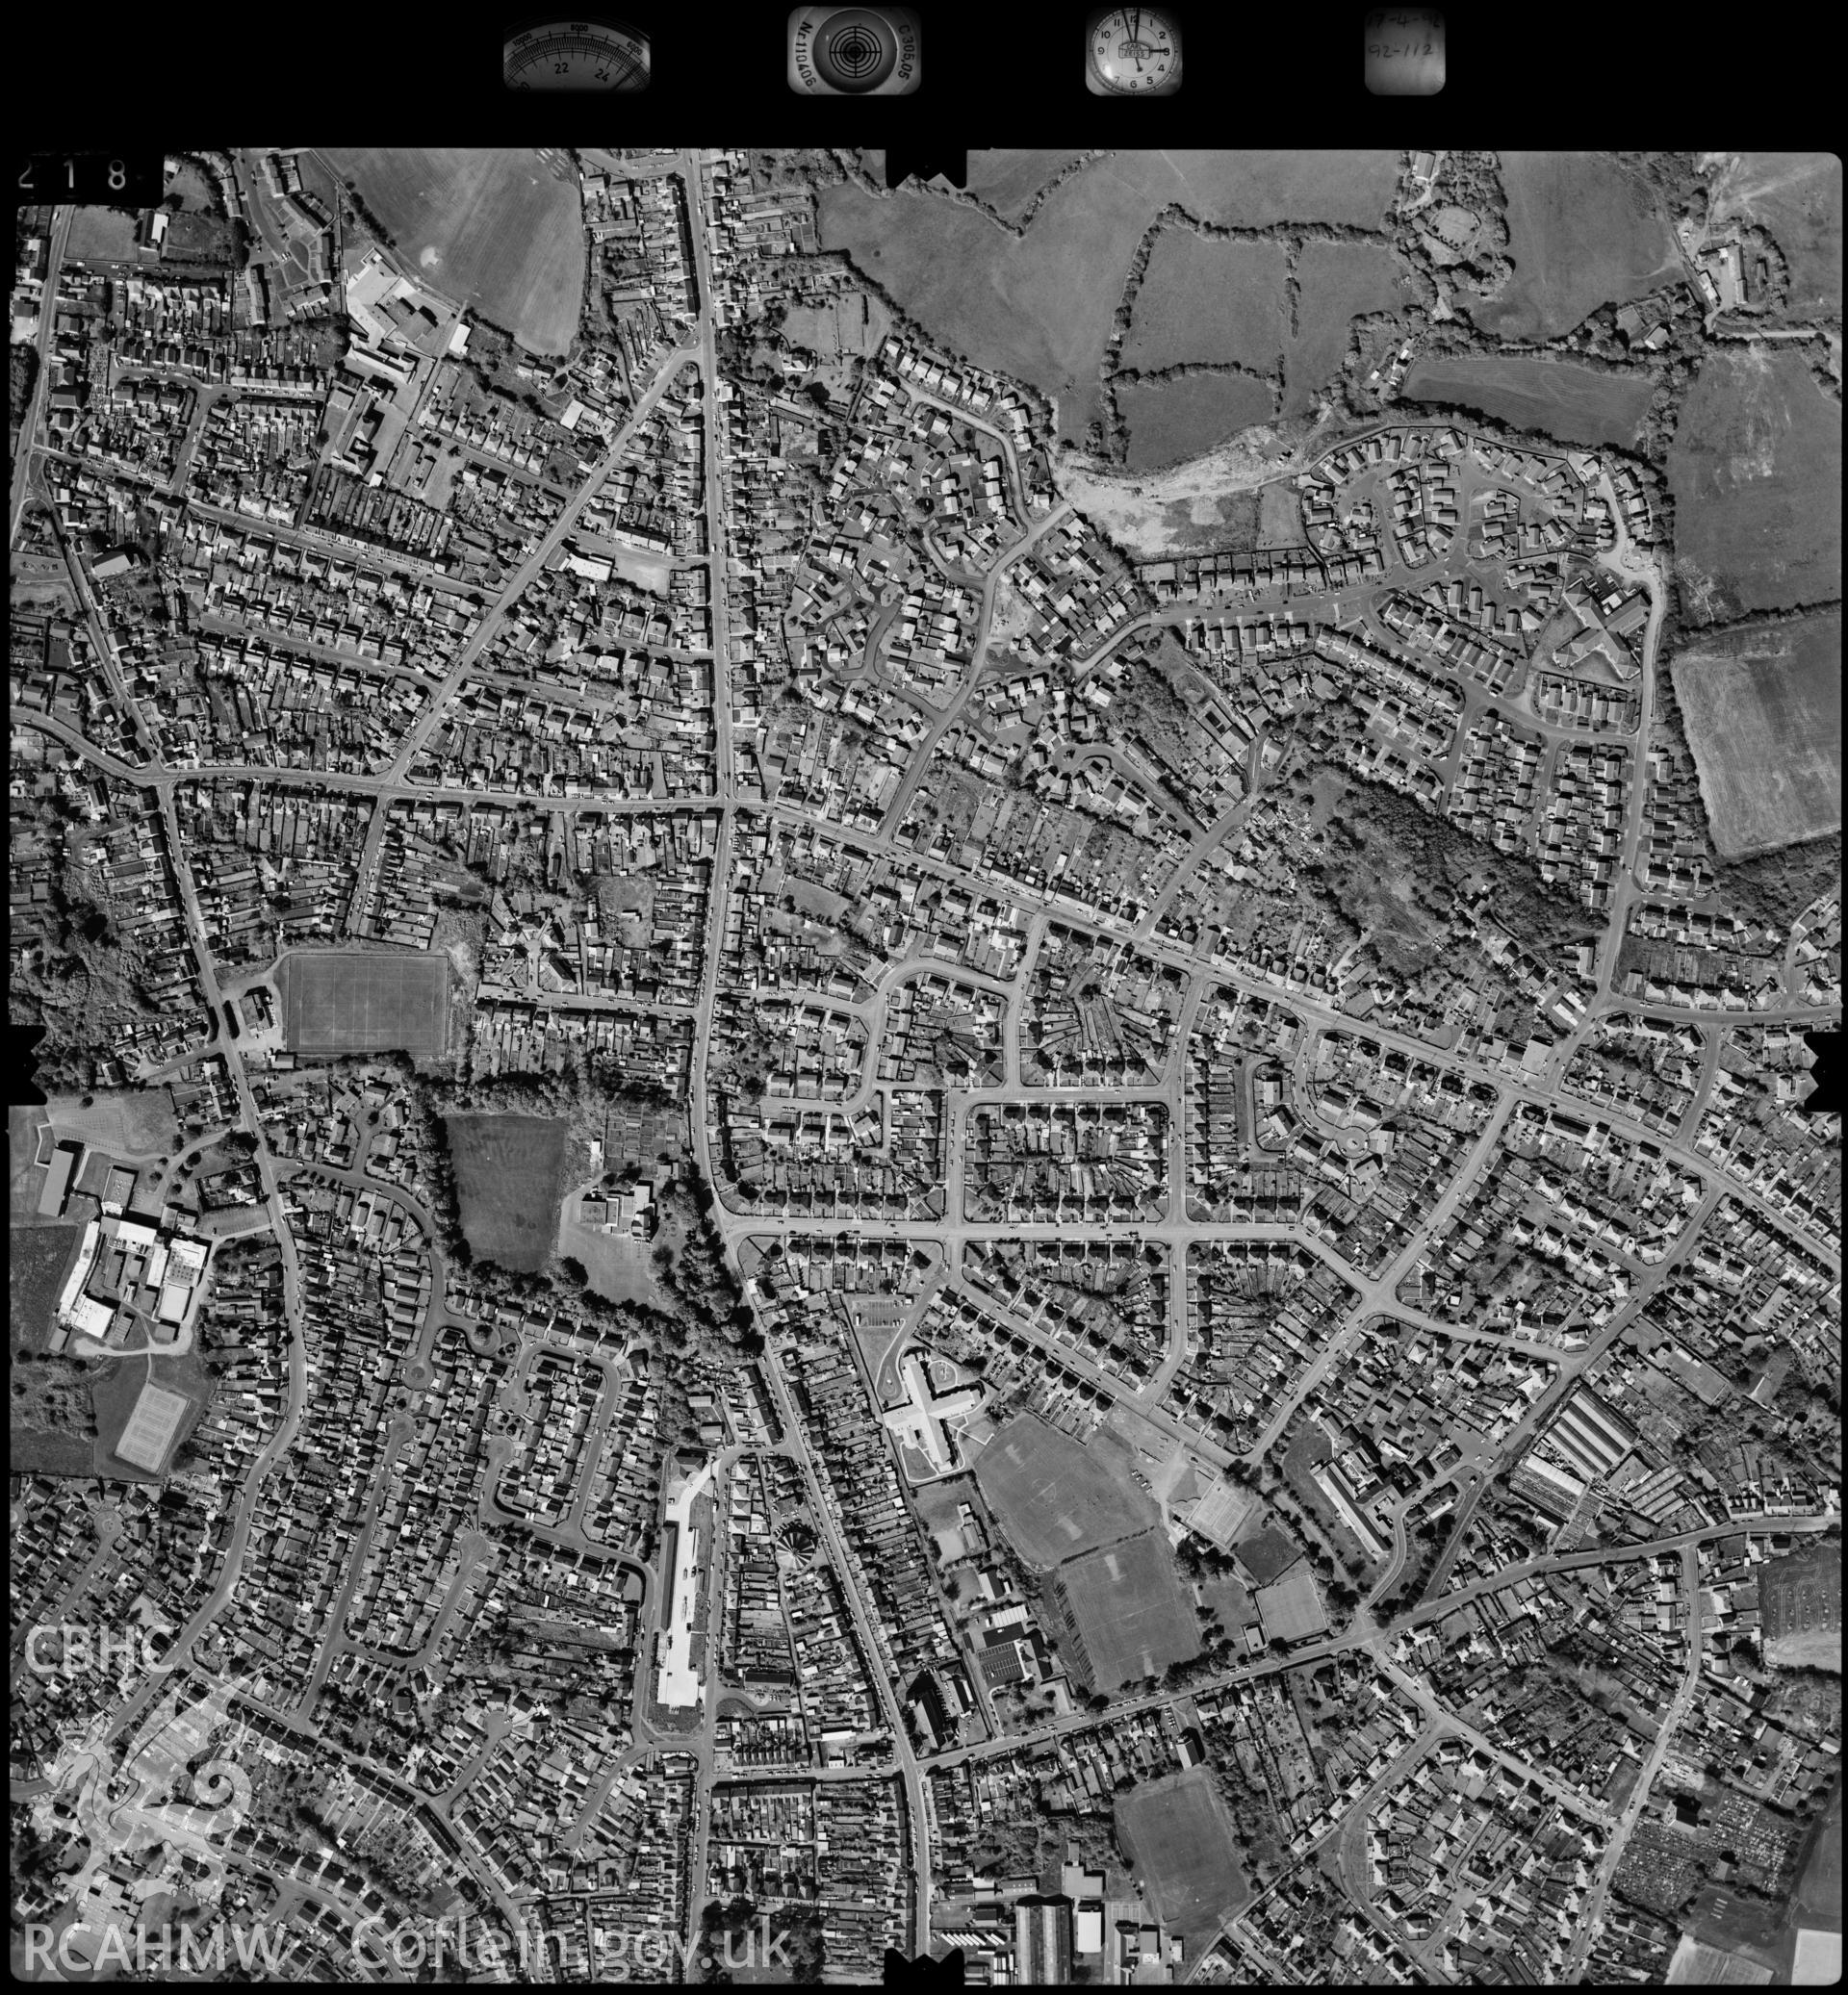 Digitized copy of an aerial photograph showing Loughor area, taken by Ordnance Survey, 1992.